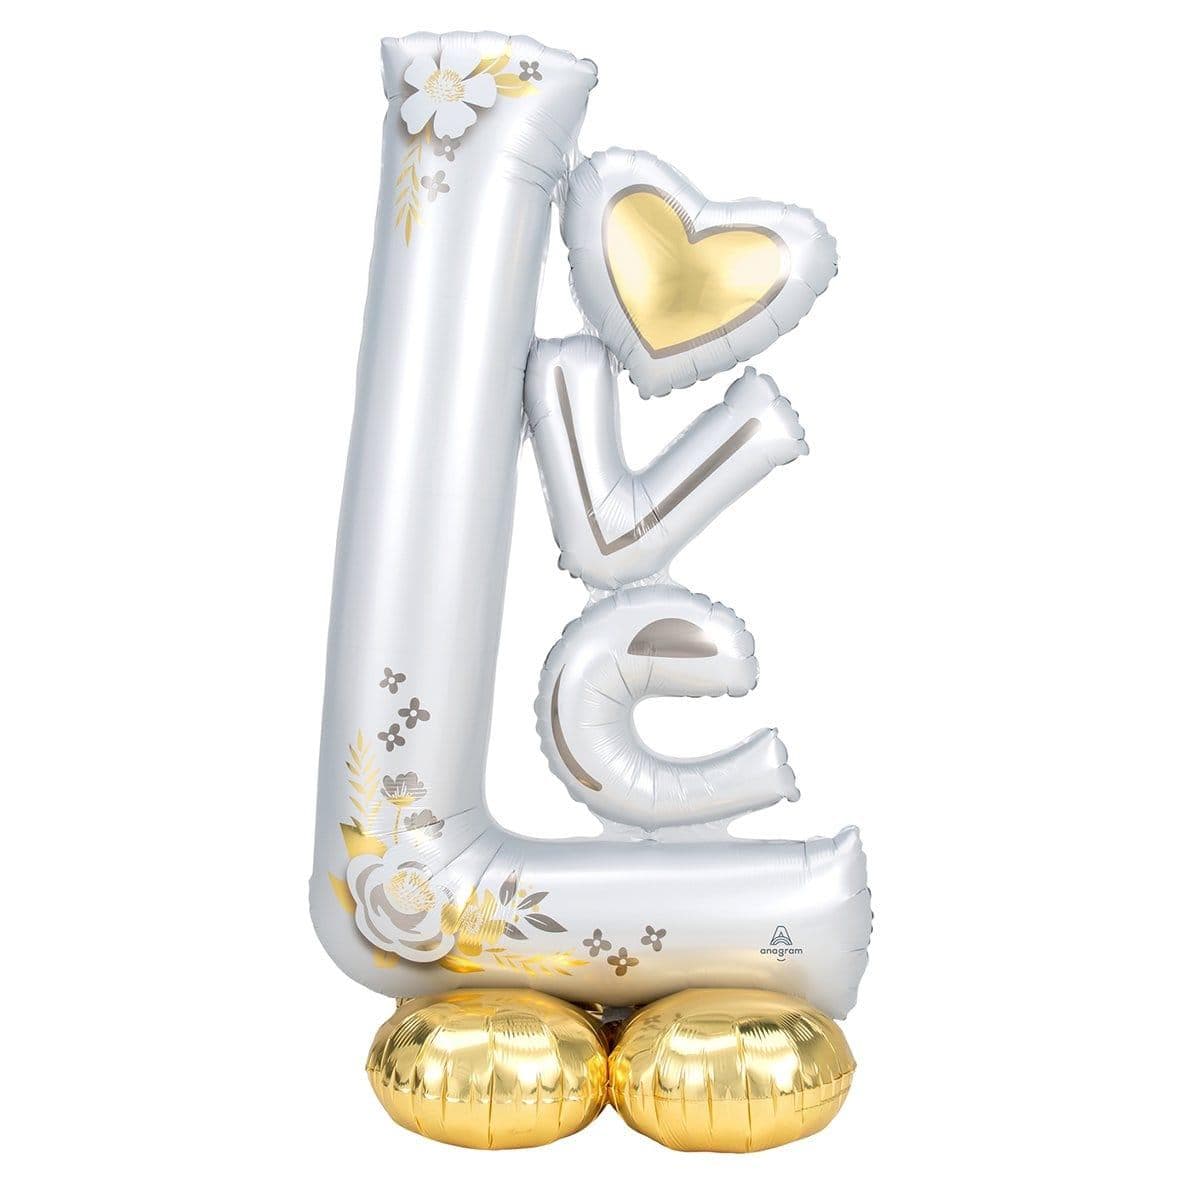 Buy Balloons LOVE Airloonz Standing Foil Air-Filled Balloon sold at Party Expert